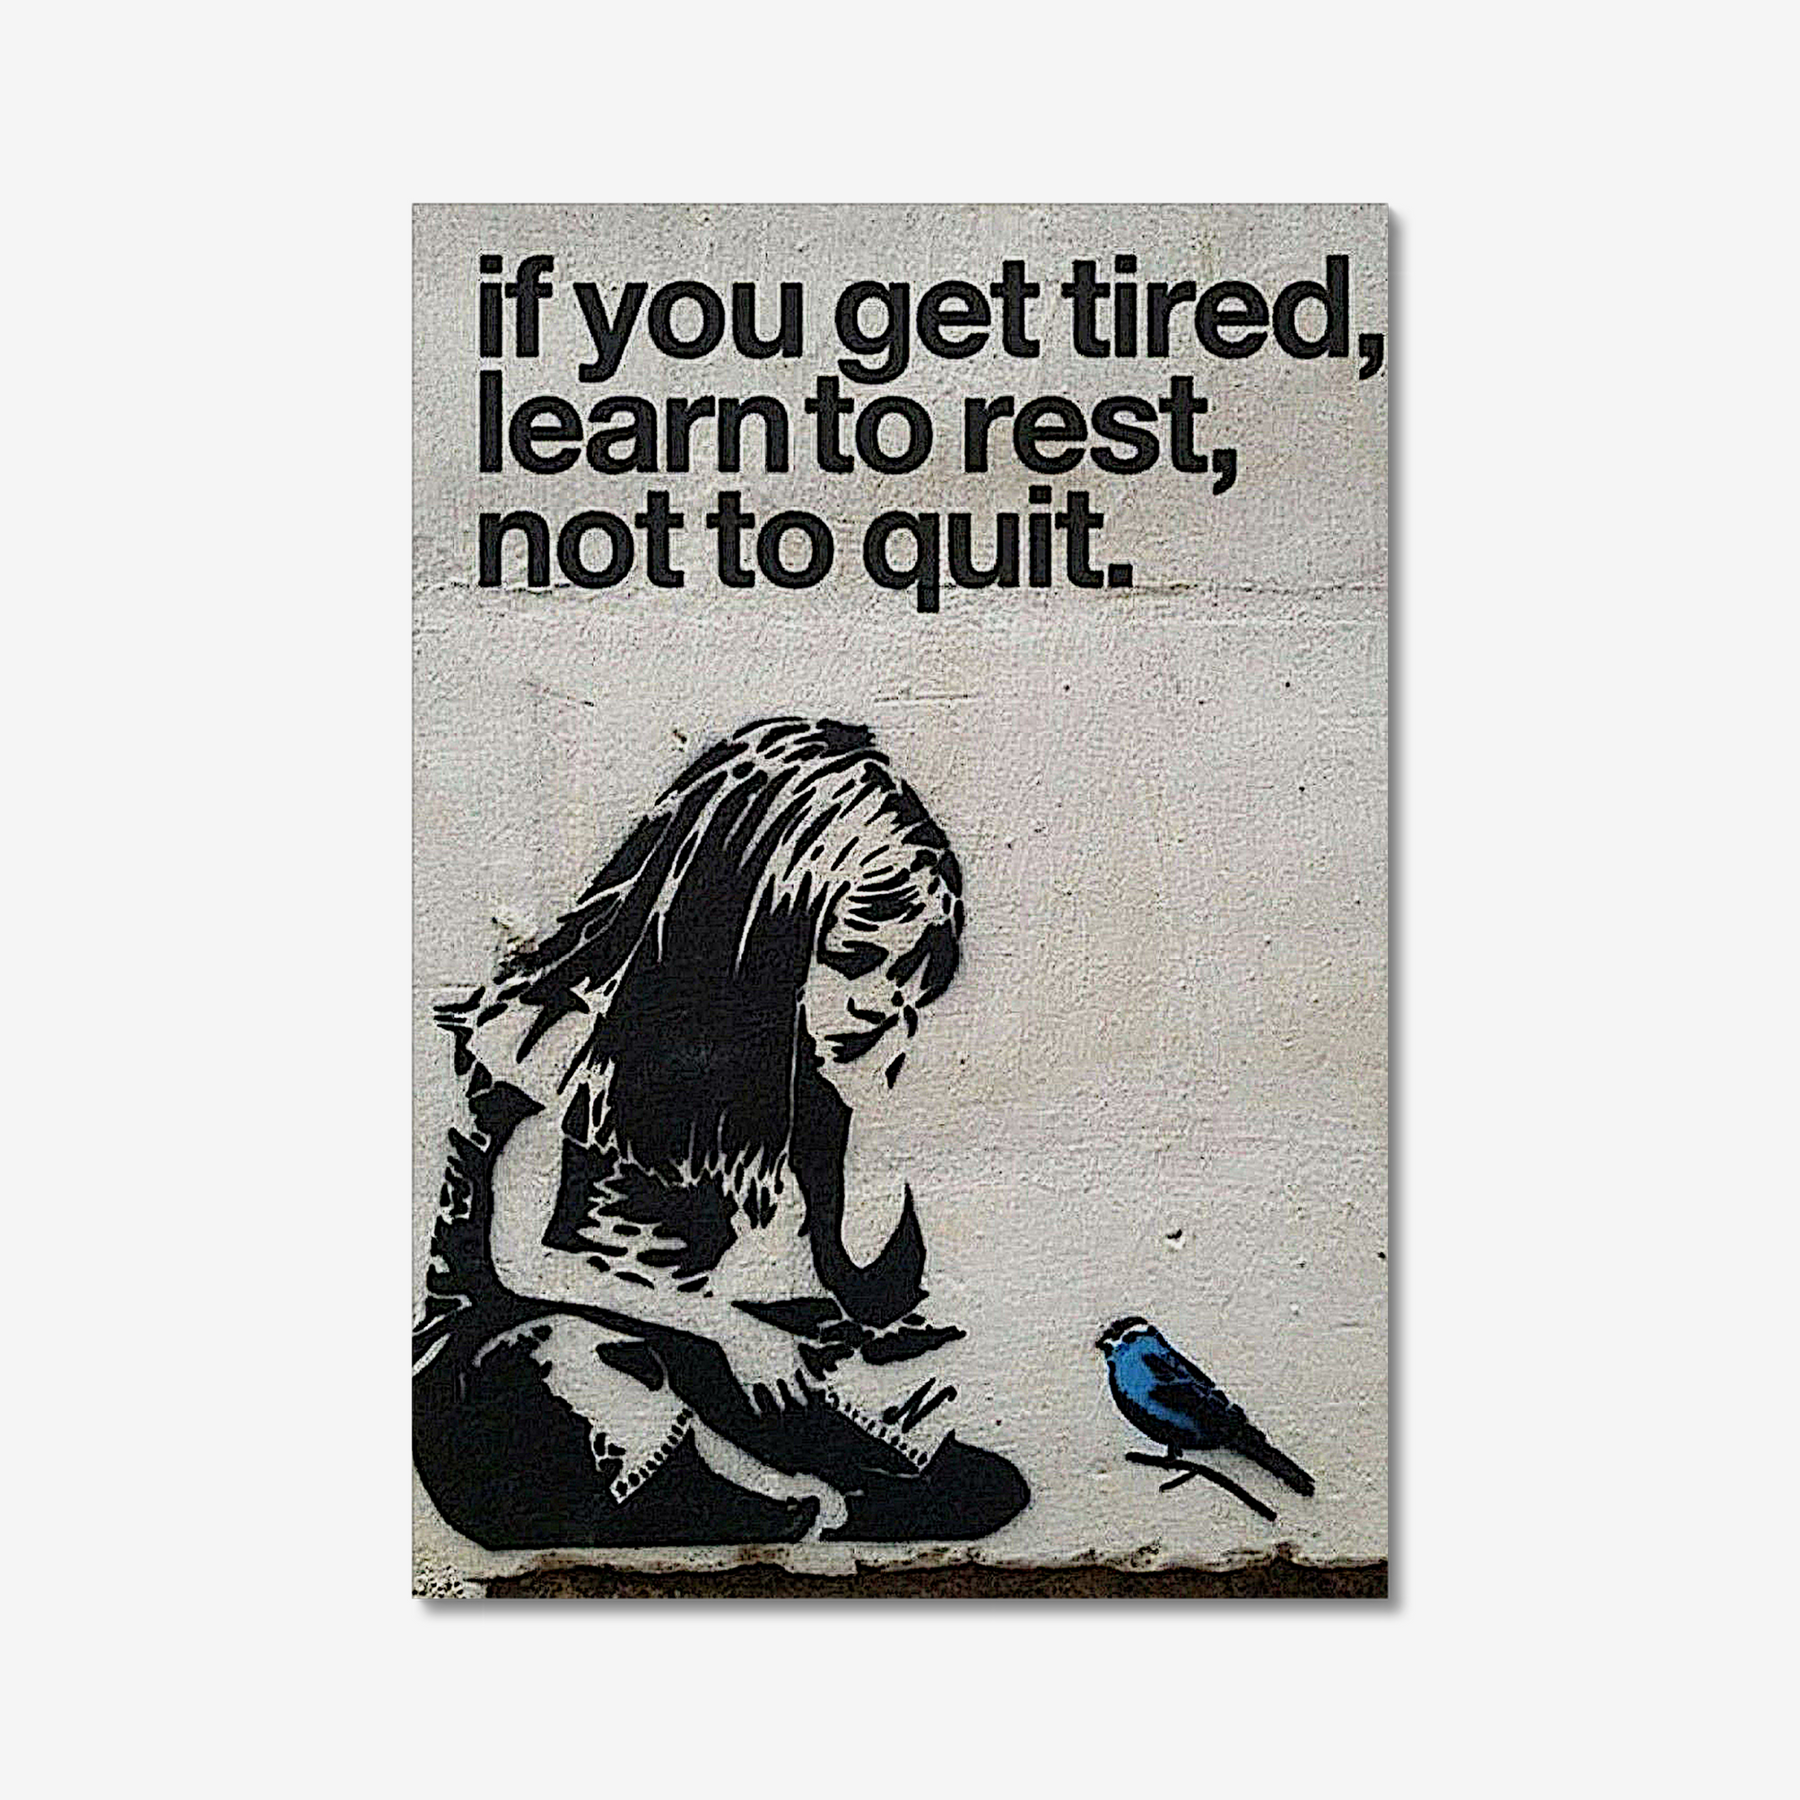 Banksy If you get tired, learn to rest, not to quit.